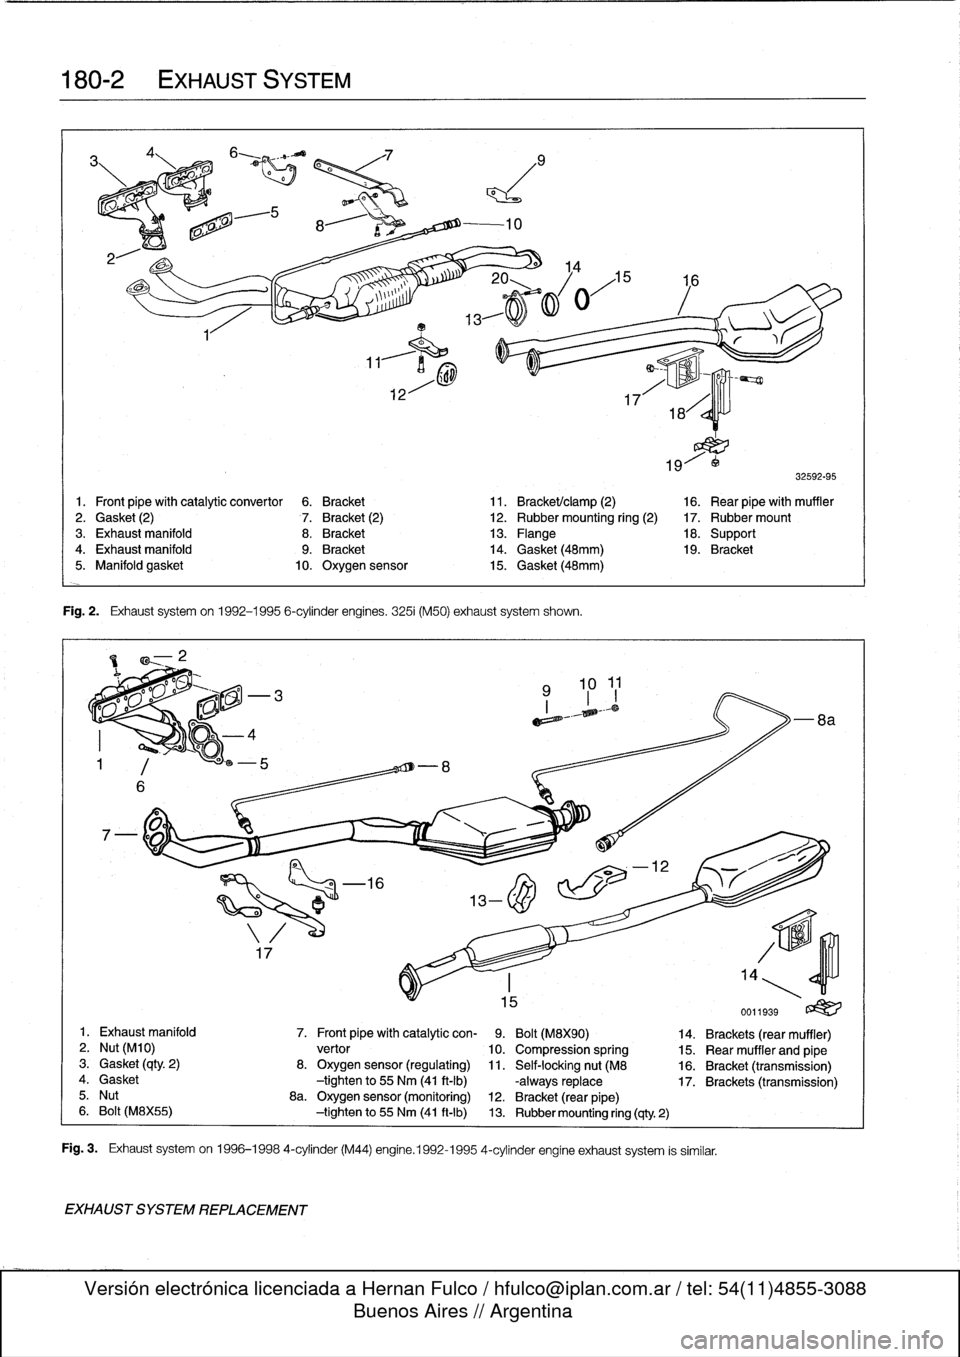 BMW 325i 1997 E36 Service Manual 
180-2

	

EXHAUST
SYSTEM

a

EXHAUST
SYSTEM
REPLACEMENT

Fig
.
2
.

	

Exhaust
systemon
1992-1995
6-cylinder
engines
.
3251
(M50)
exhaust
system
shown
.

E~

)l-,malo
m~=

i

32592-95

1
.

	

Front
